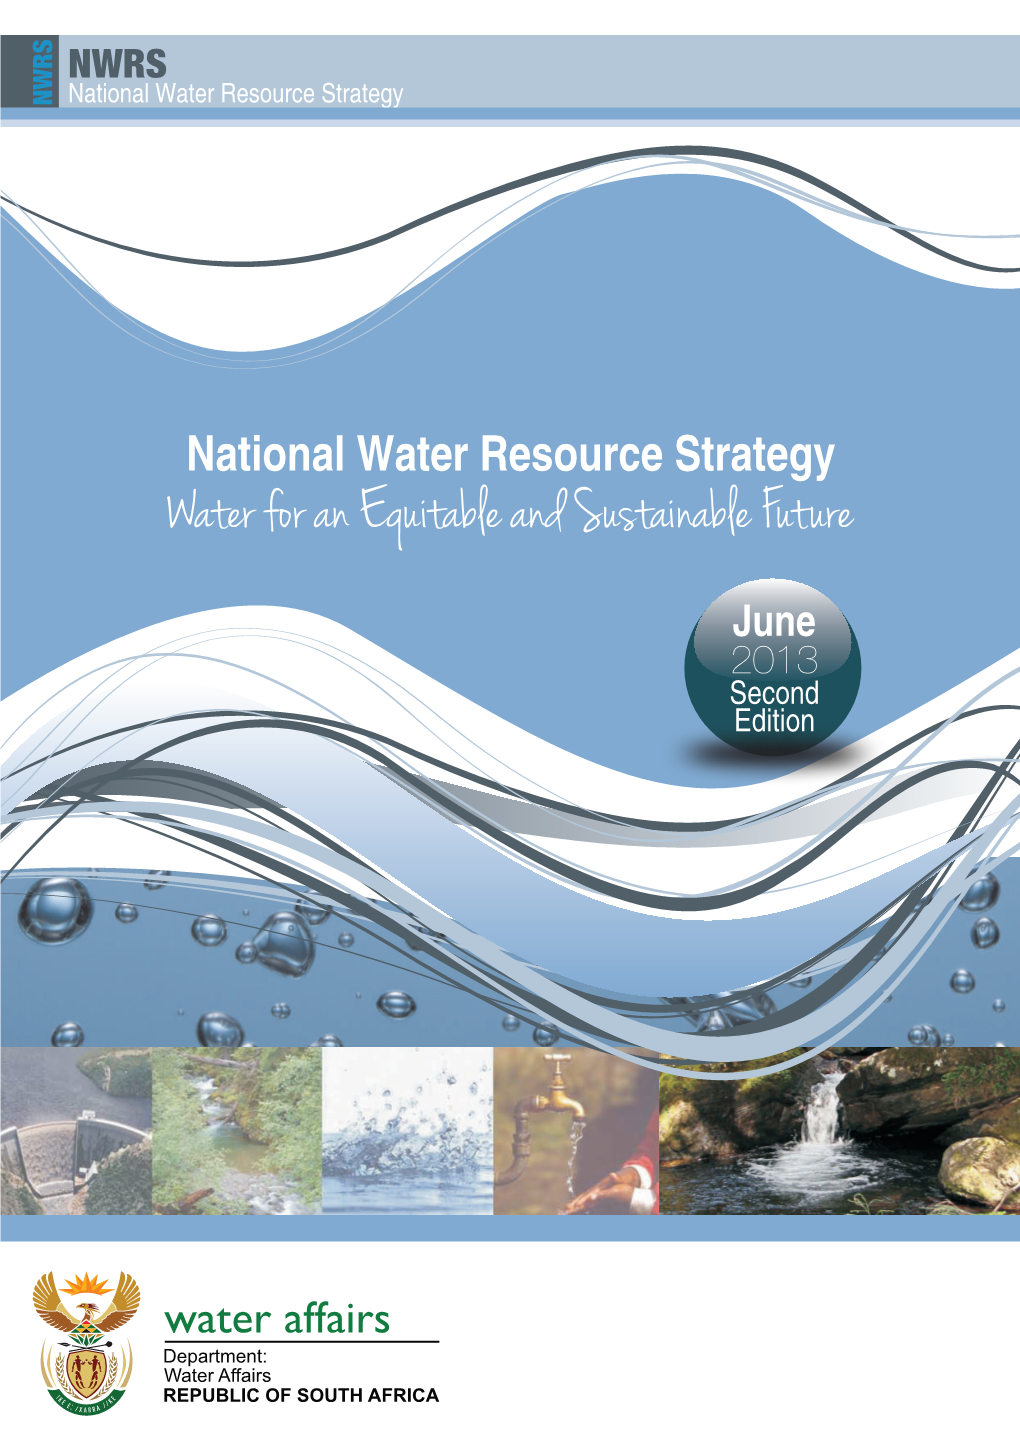 Water for an Equitable and Sustainable Future